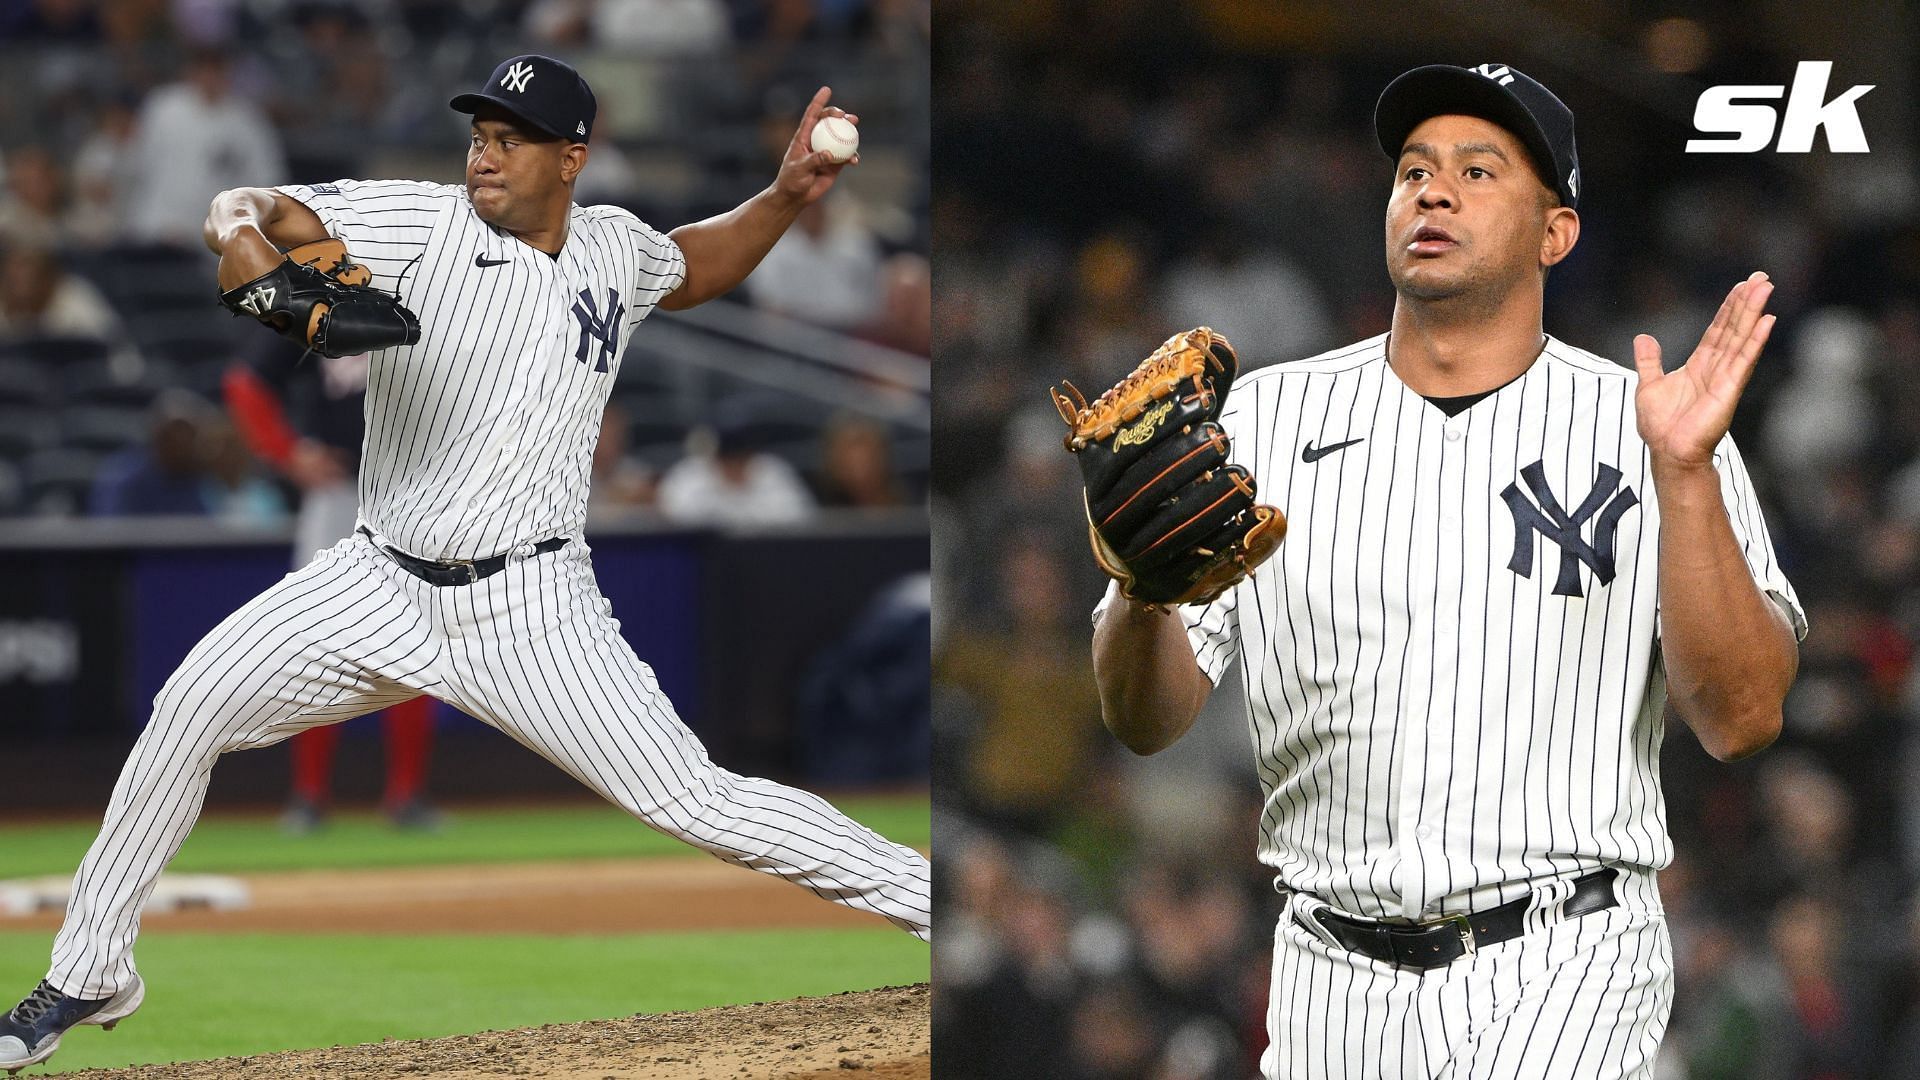 The New York Yankees are reportedly interested in re-signing Wandy Peralta